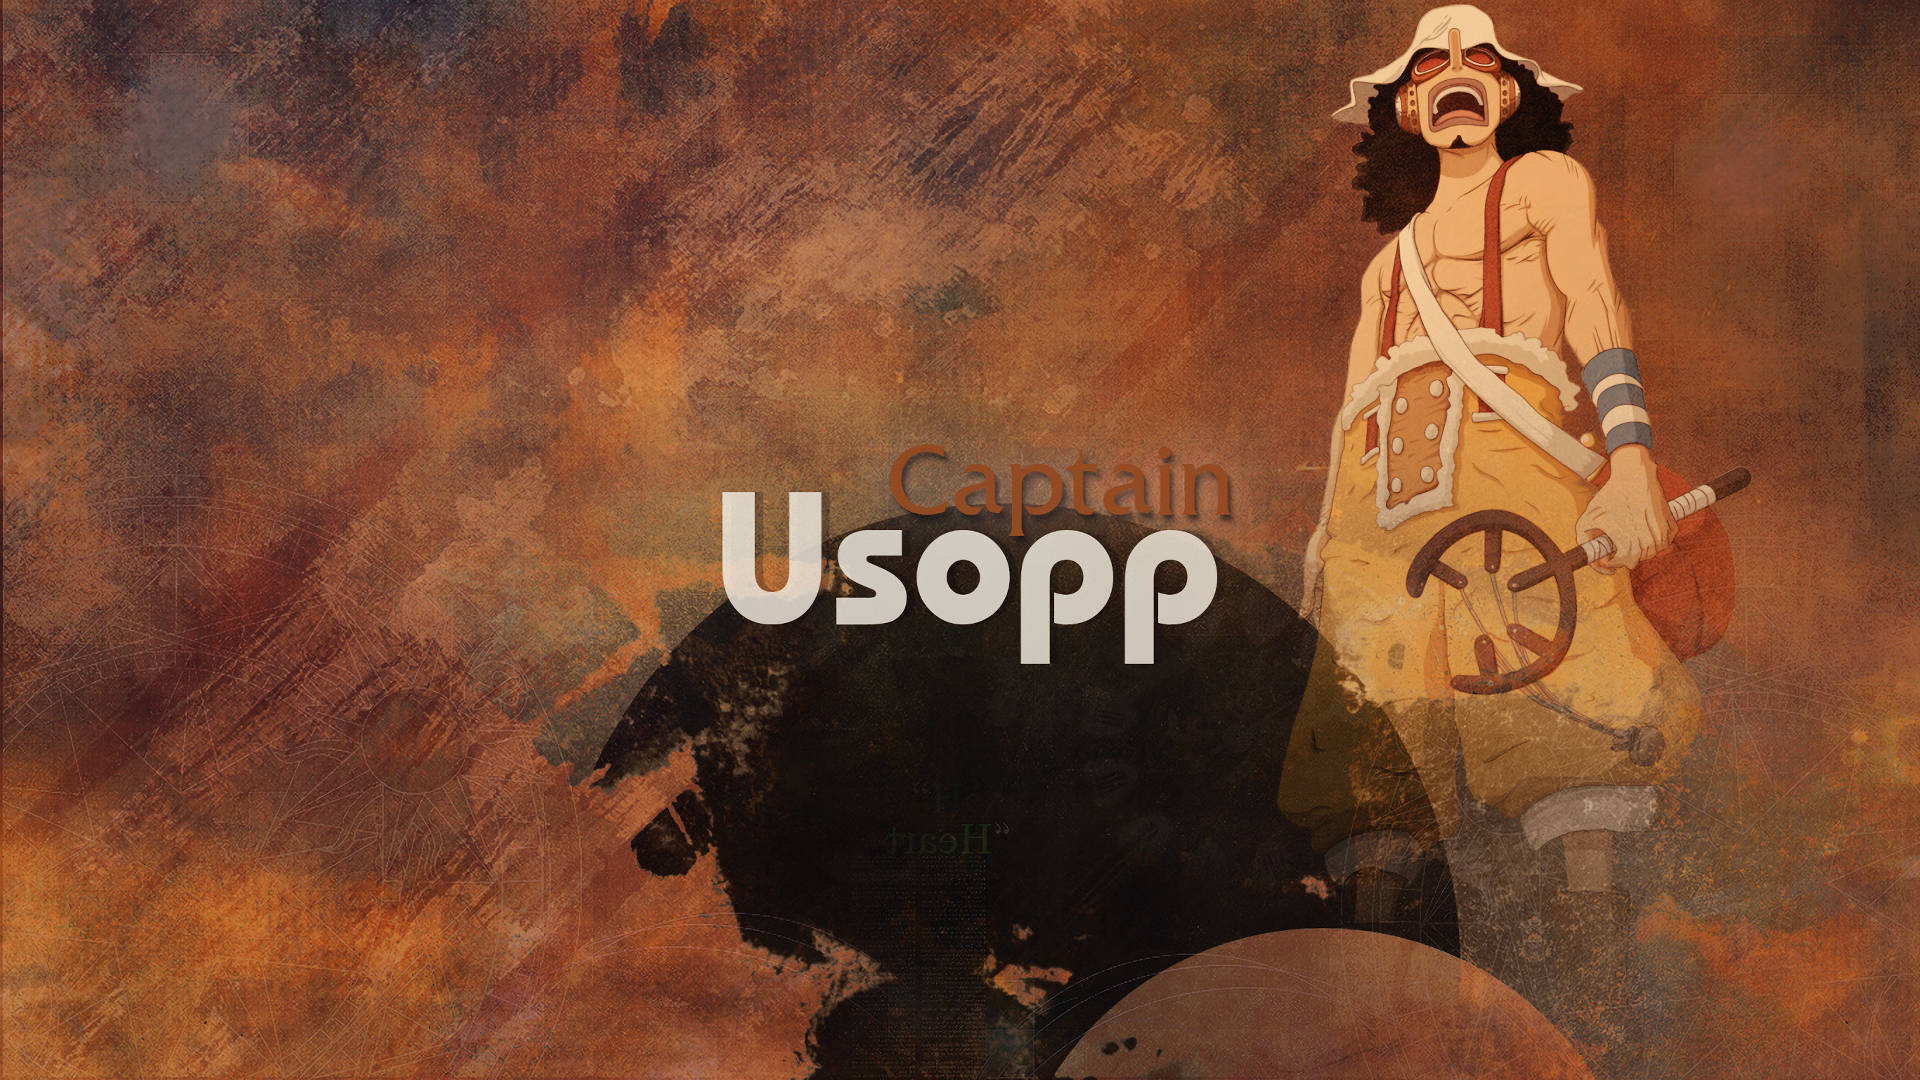 One Piece Usopp Abstract Paint Art Background